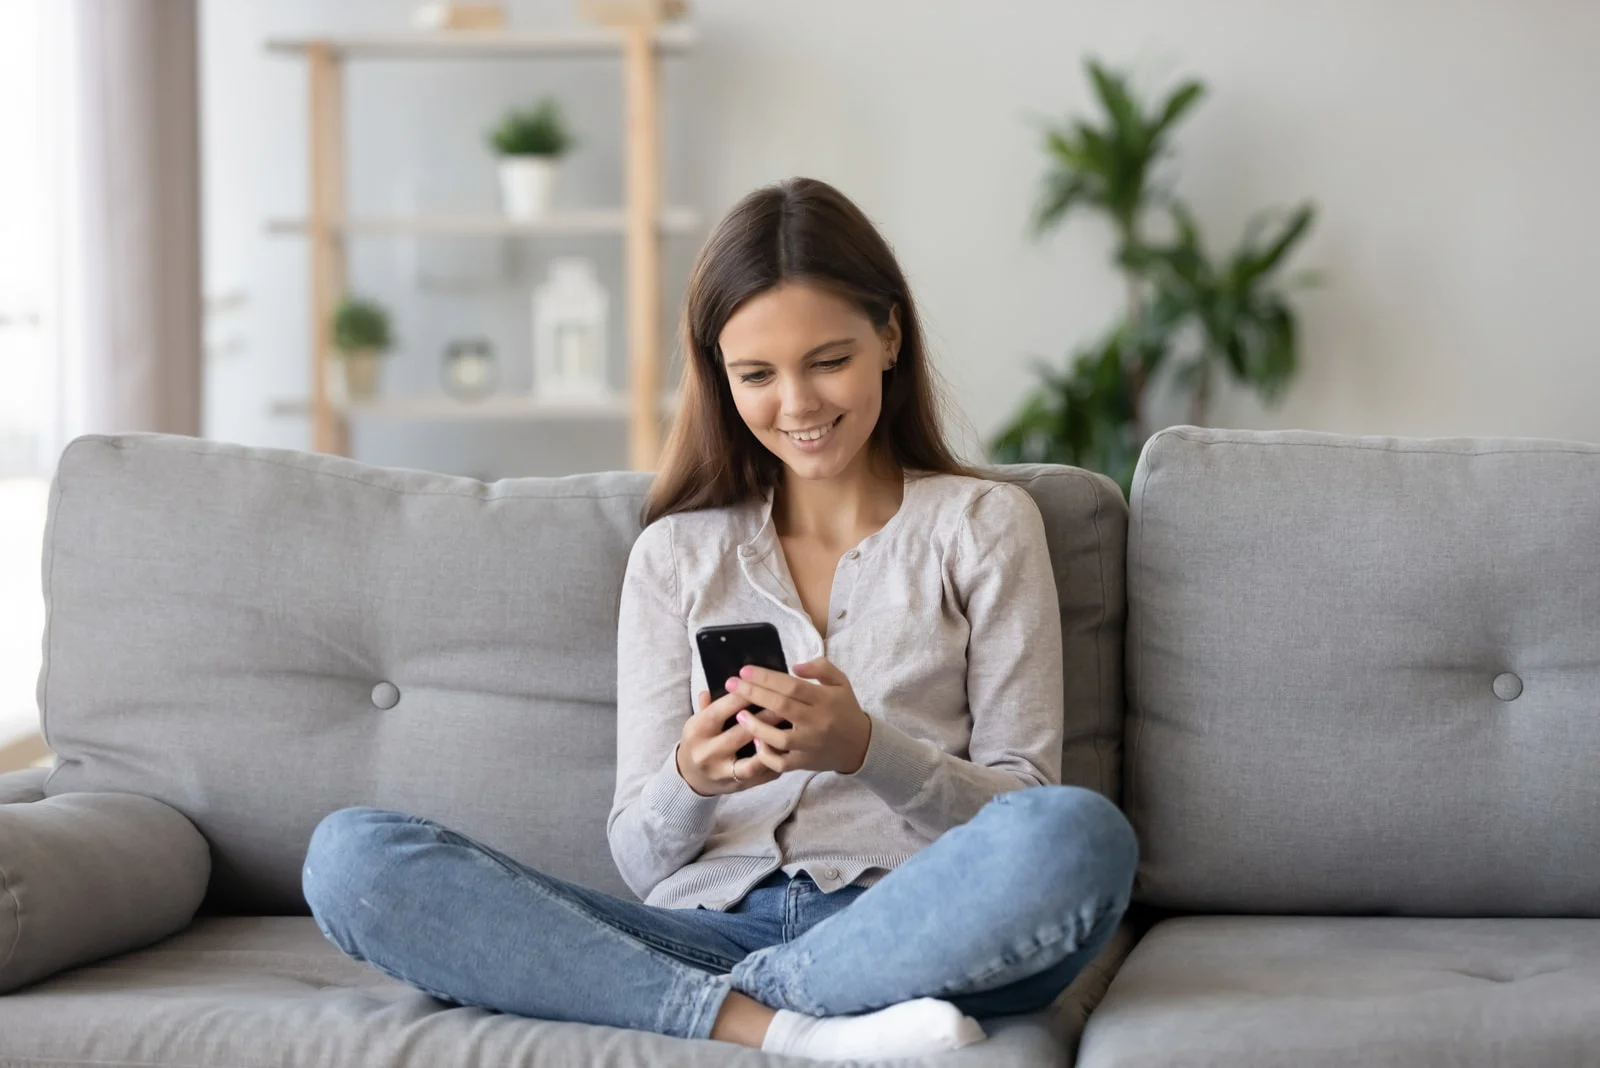 young smiling woman sitting on the couch and looking at phone